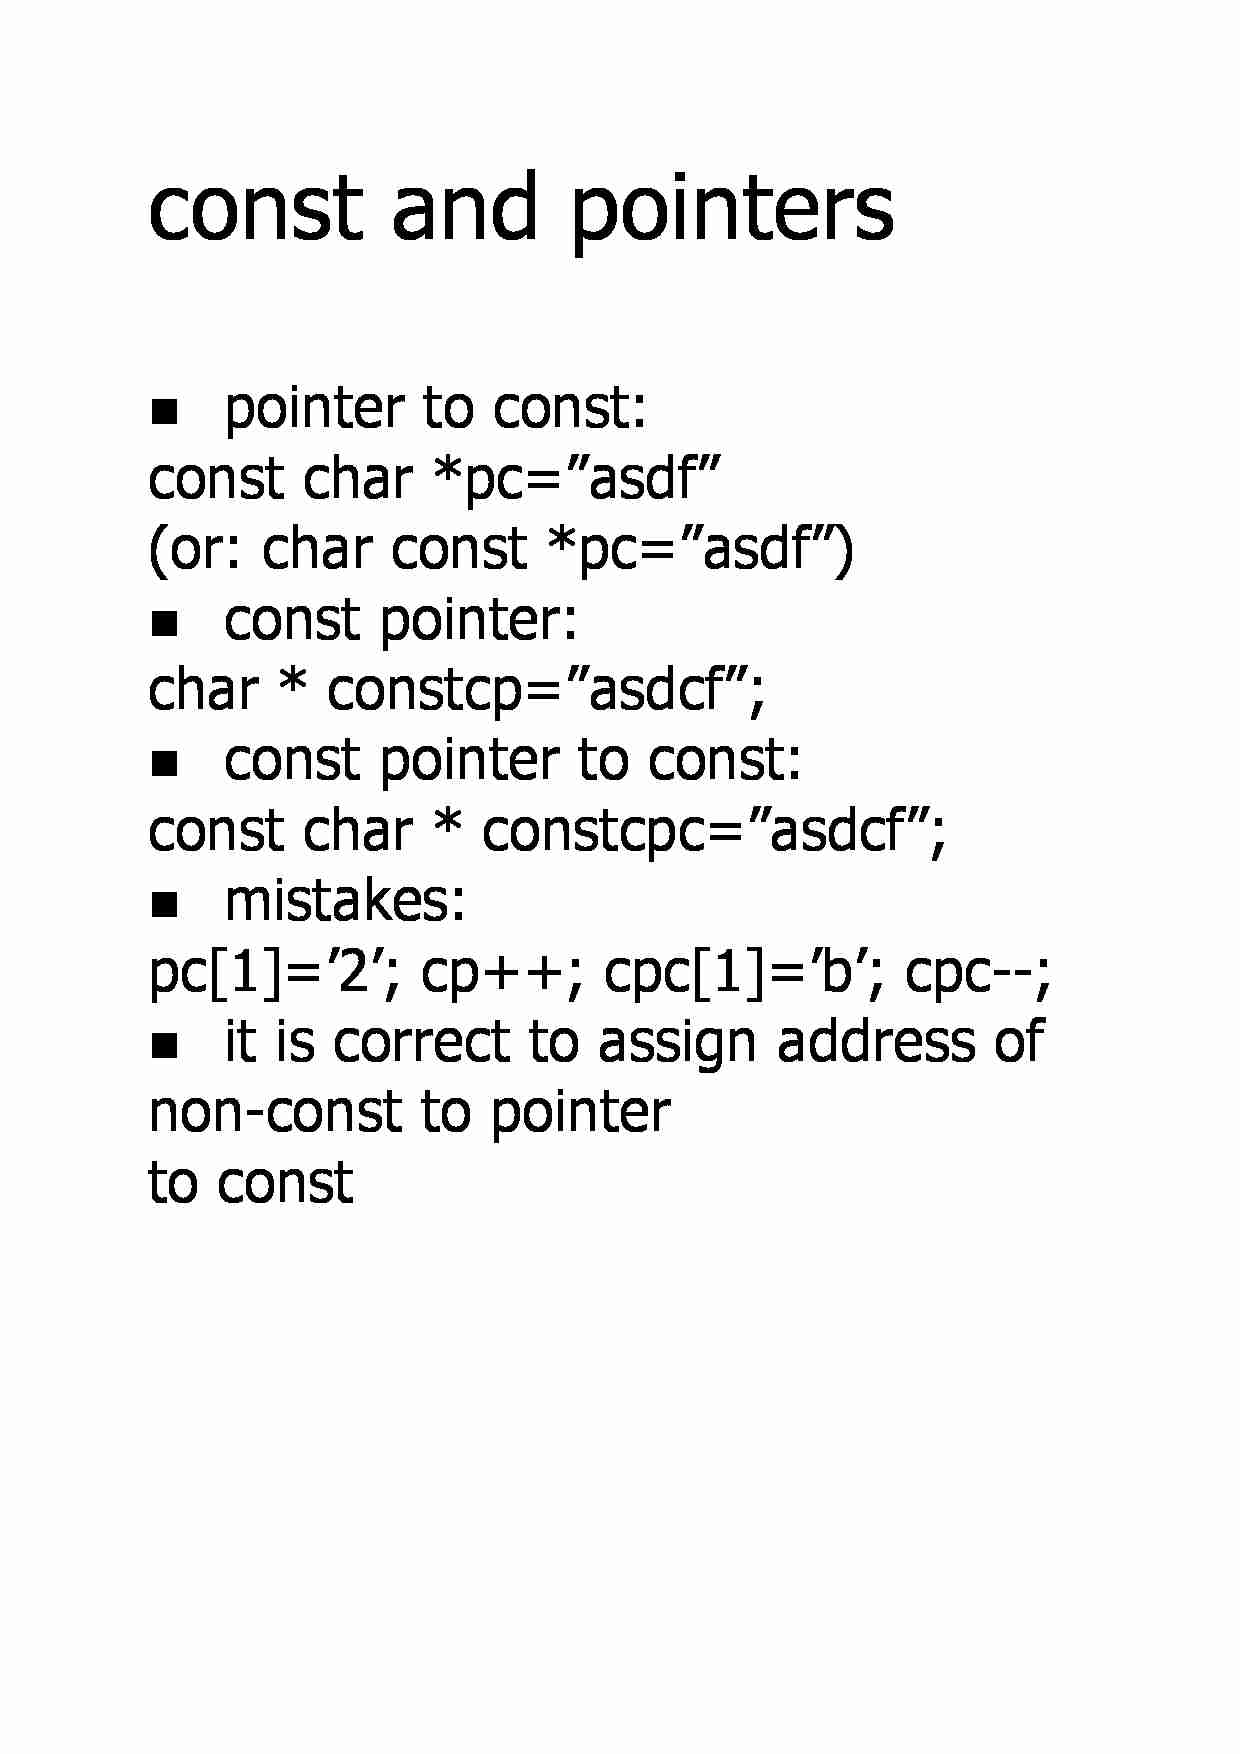 Const and pointers - strona 1